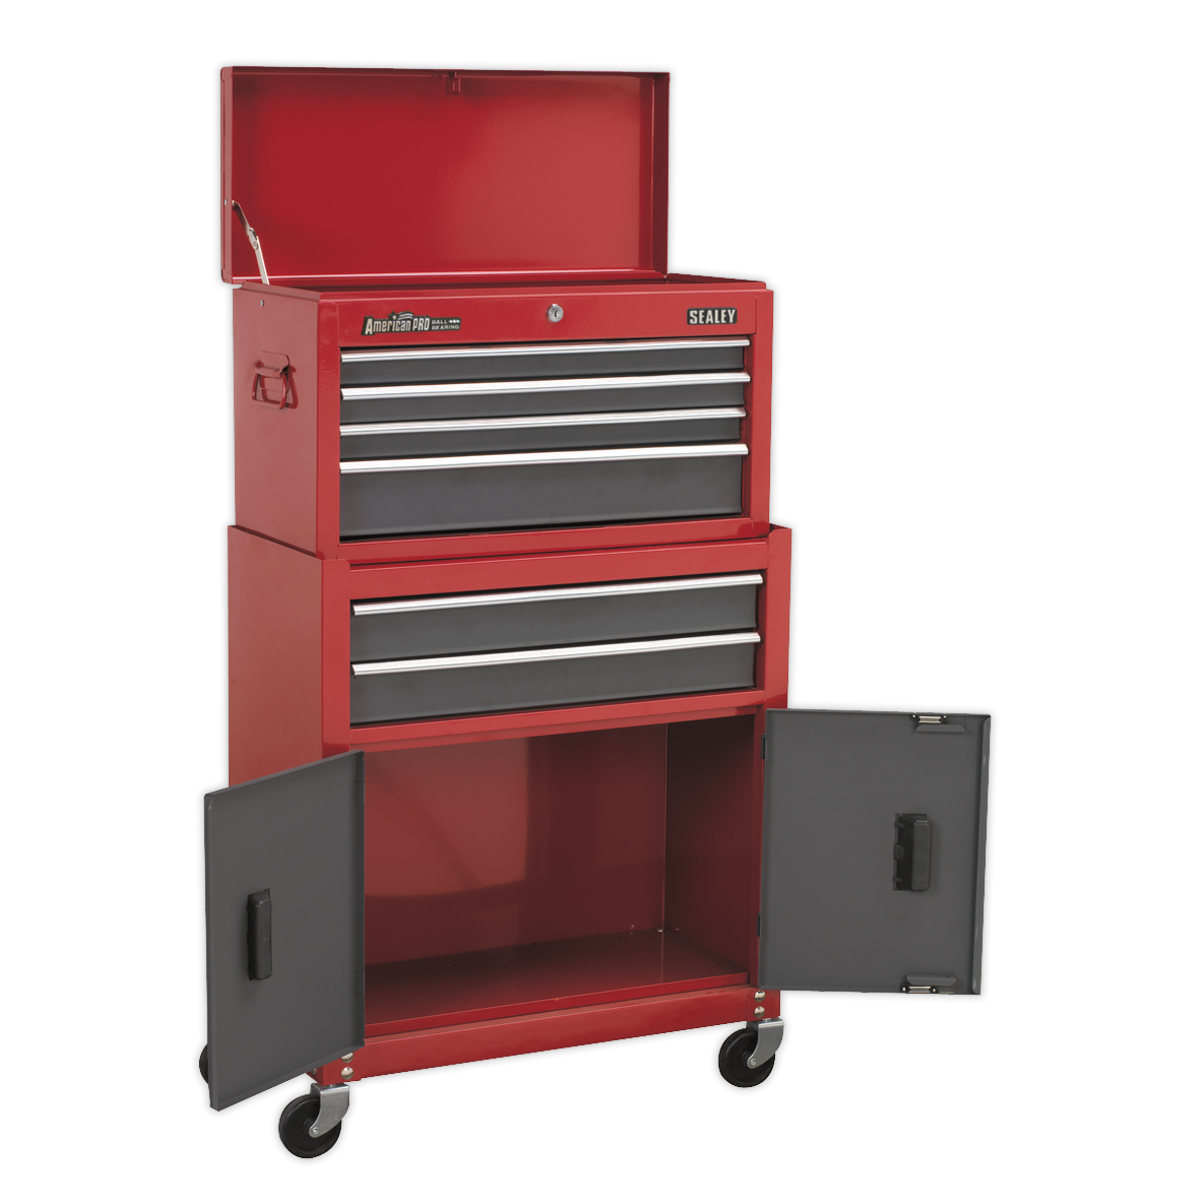 Sealey 6 Drawer Topchest & Rollcab Combination with Ball-Bearing Slides - Red/Grey AP2200BB